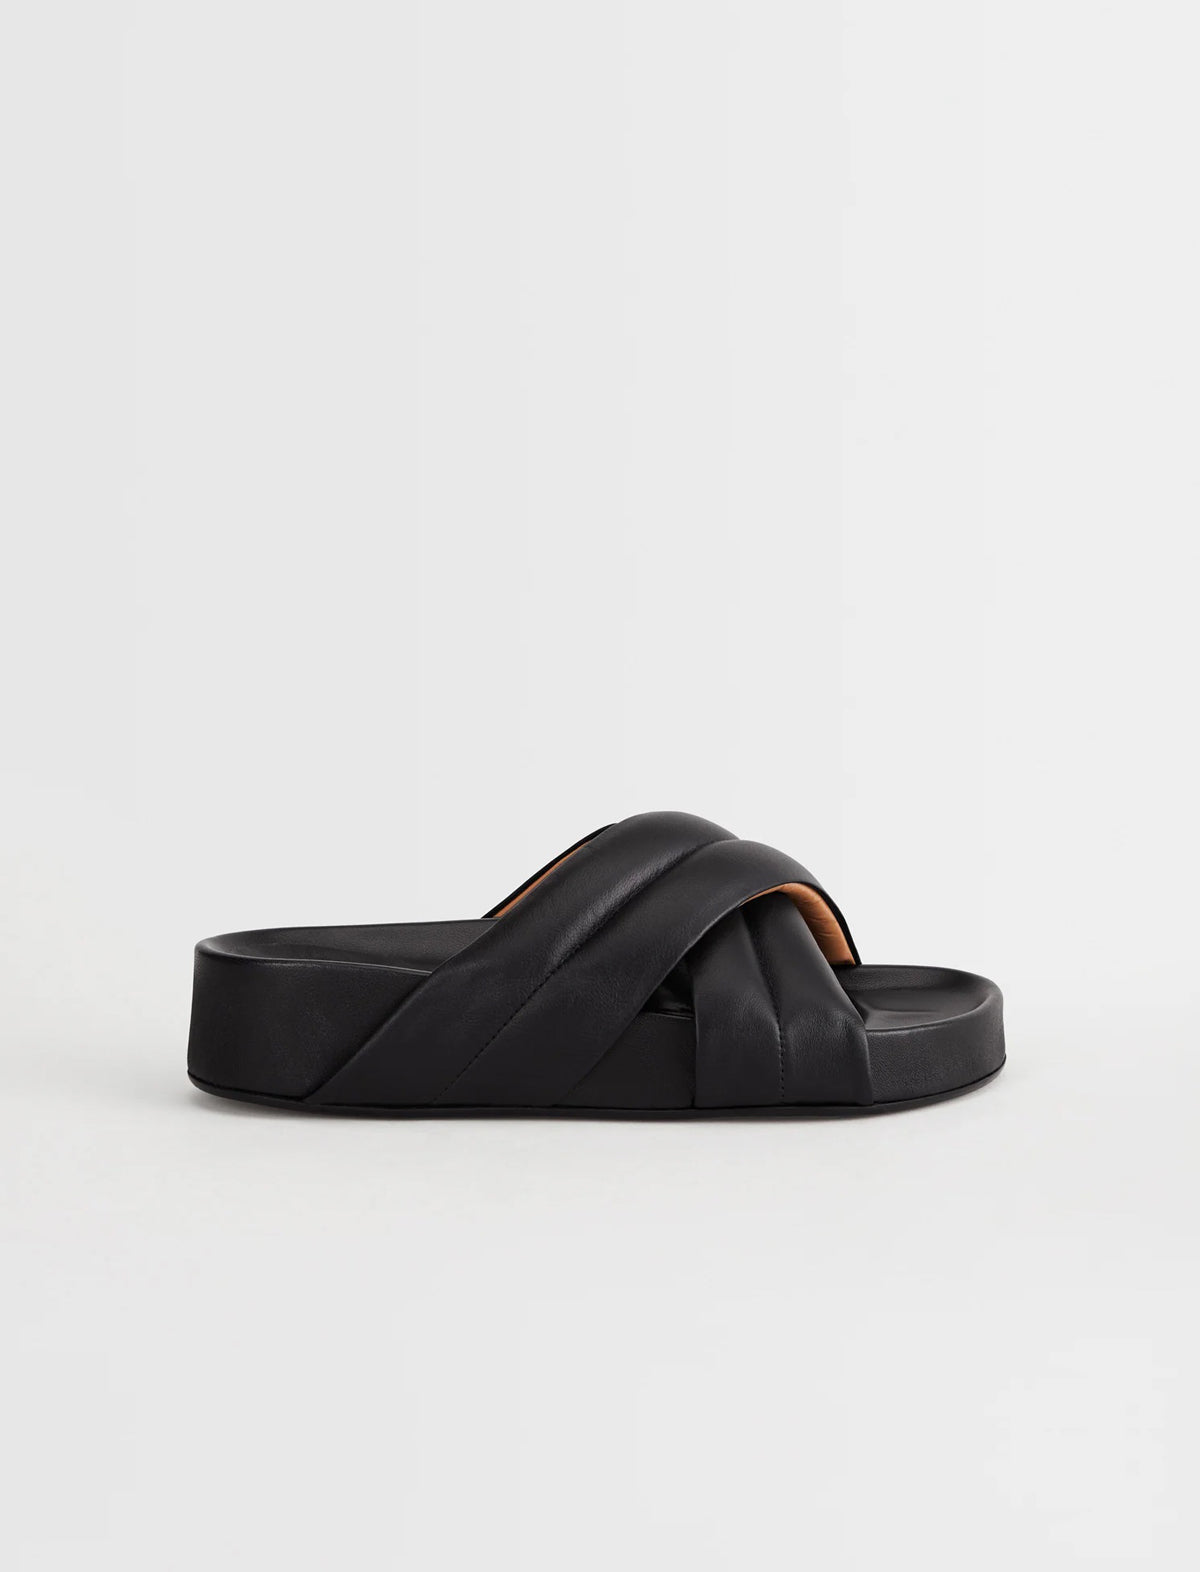 ATP Atelier Airali Nappa Everyday Sandals in Black